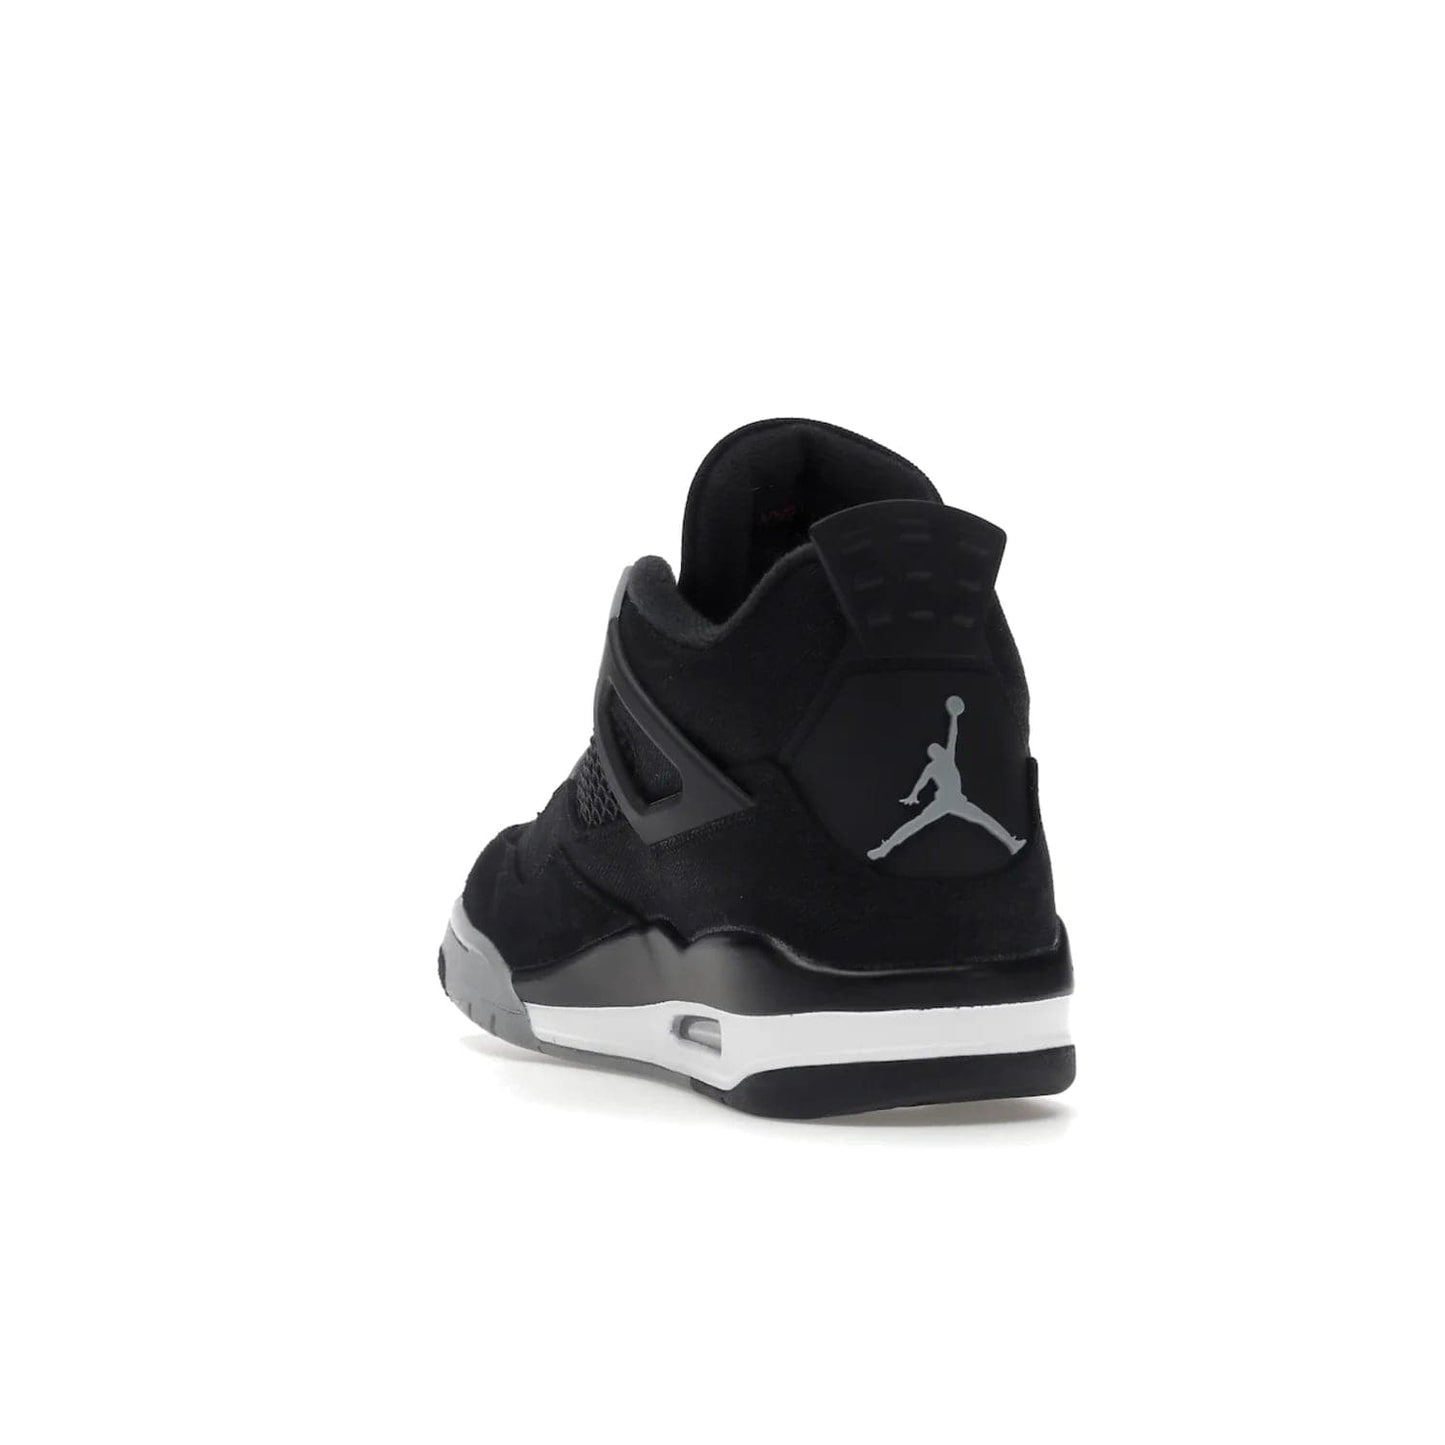 Jordan 4 Retro SE Black Canvas - Image 26 - Only at www.BallersClubKickz.com - The Air Jordan 4 Retro SE Black Canvas brings timeless style and modern luxury. Classic mid-top sneaker in black canvas and grey suede with tonal Jumpman logo, Flight logo and polyurethane midsole with visible Air-sole cushioning. Refresh your sneaker collection and rock the Air Jordan 4 Retro SE Black Canvas.